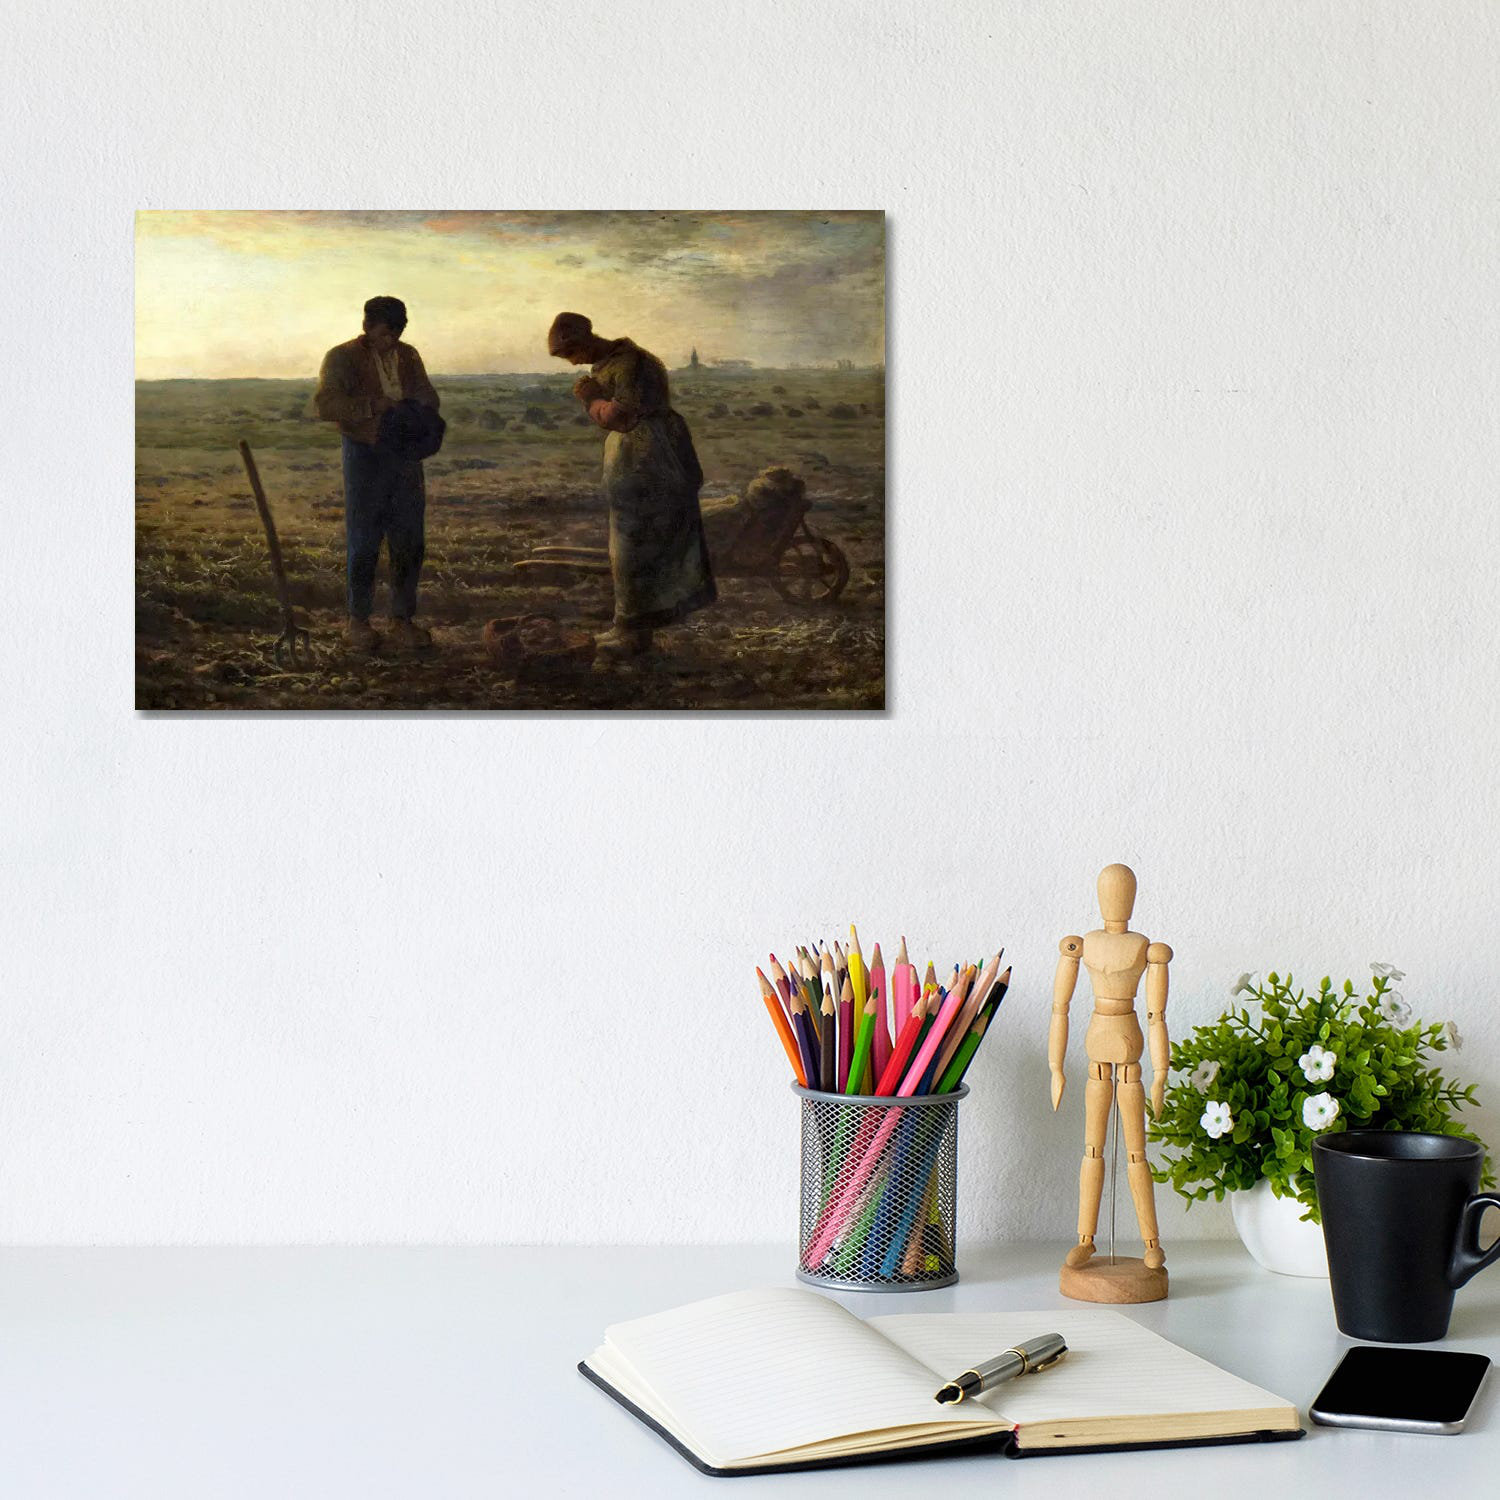 Bless international The Angelus On Canvas by Jean-Francois Millet Painting